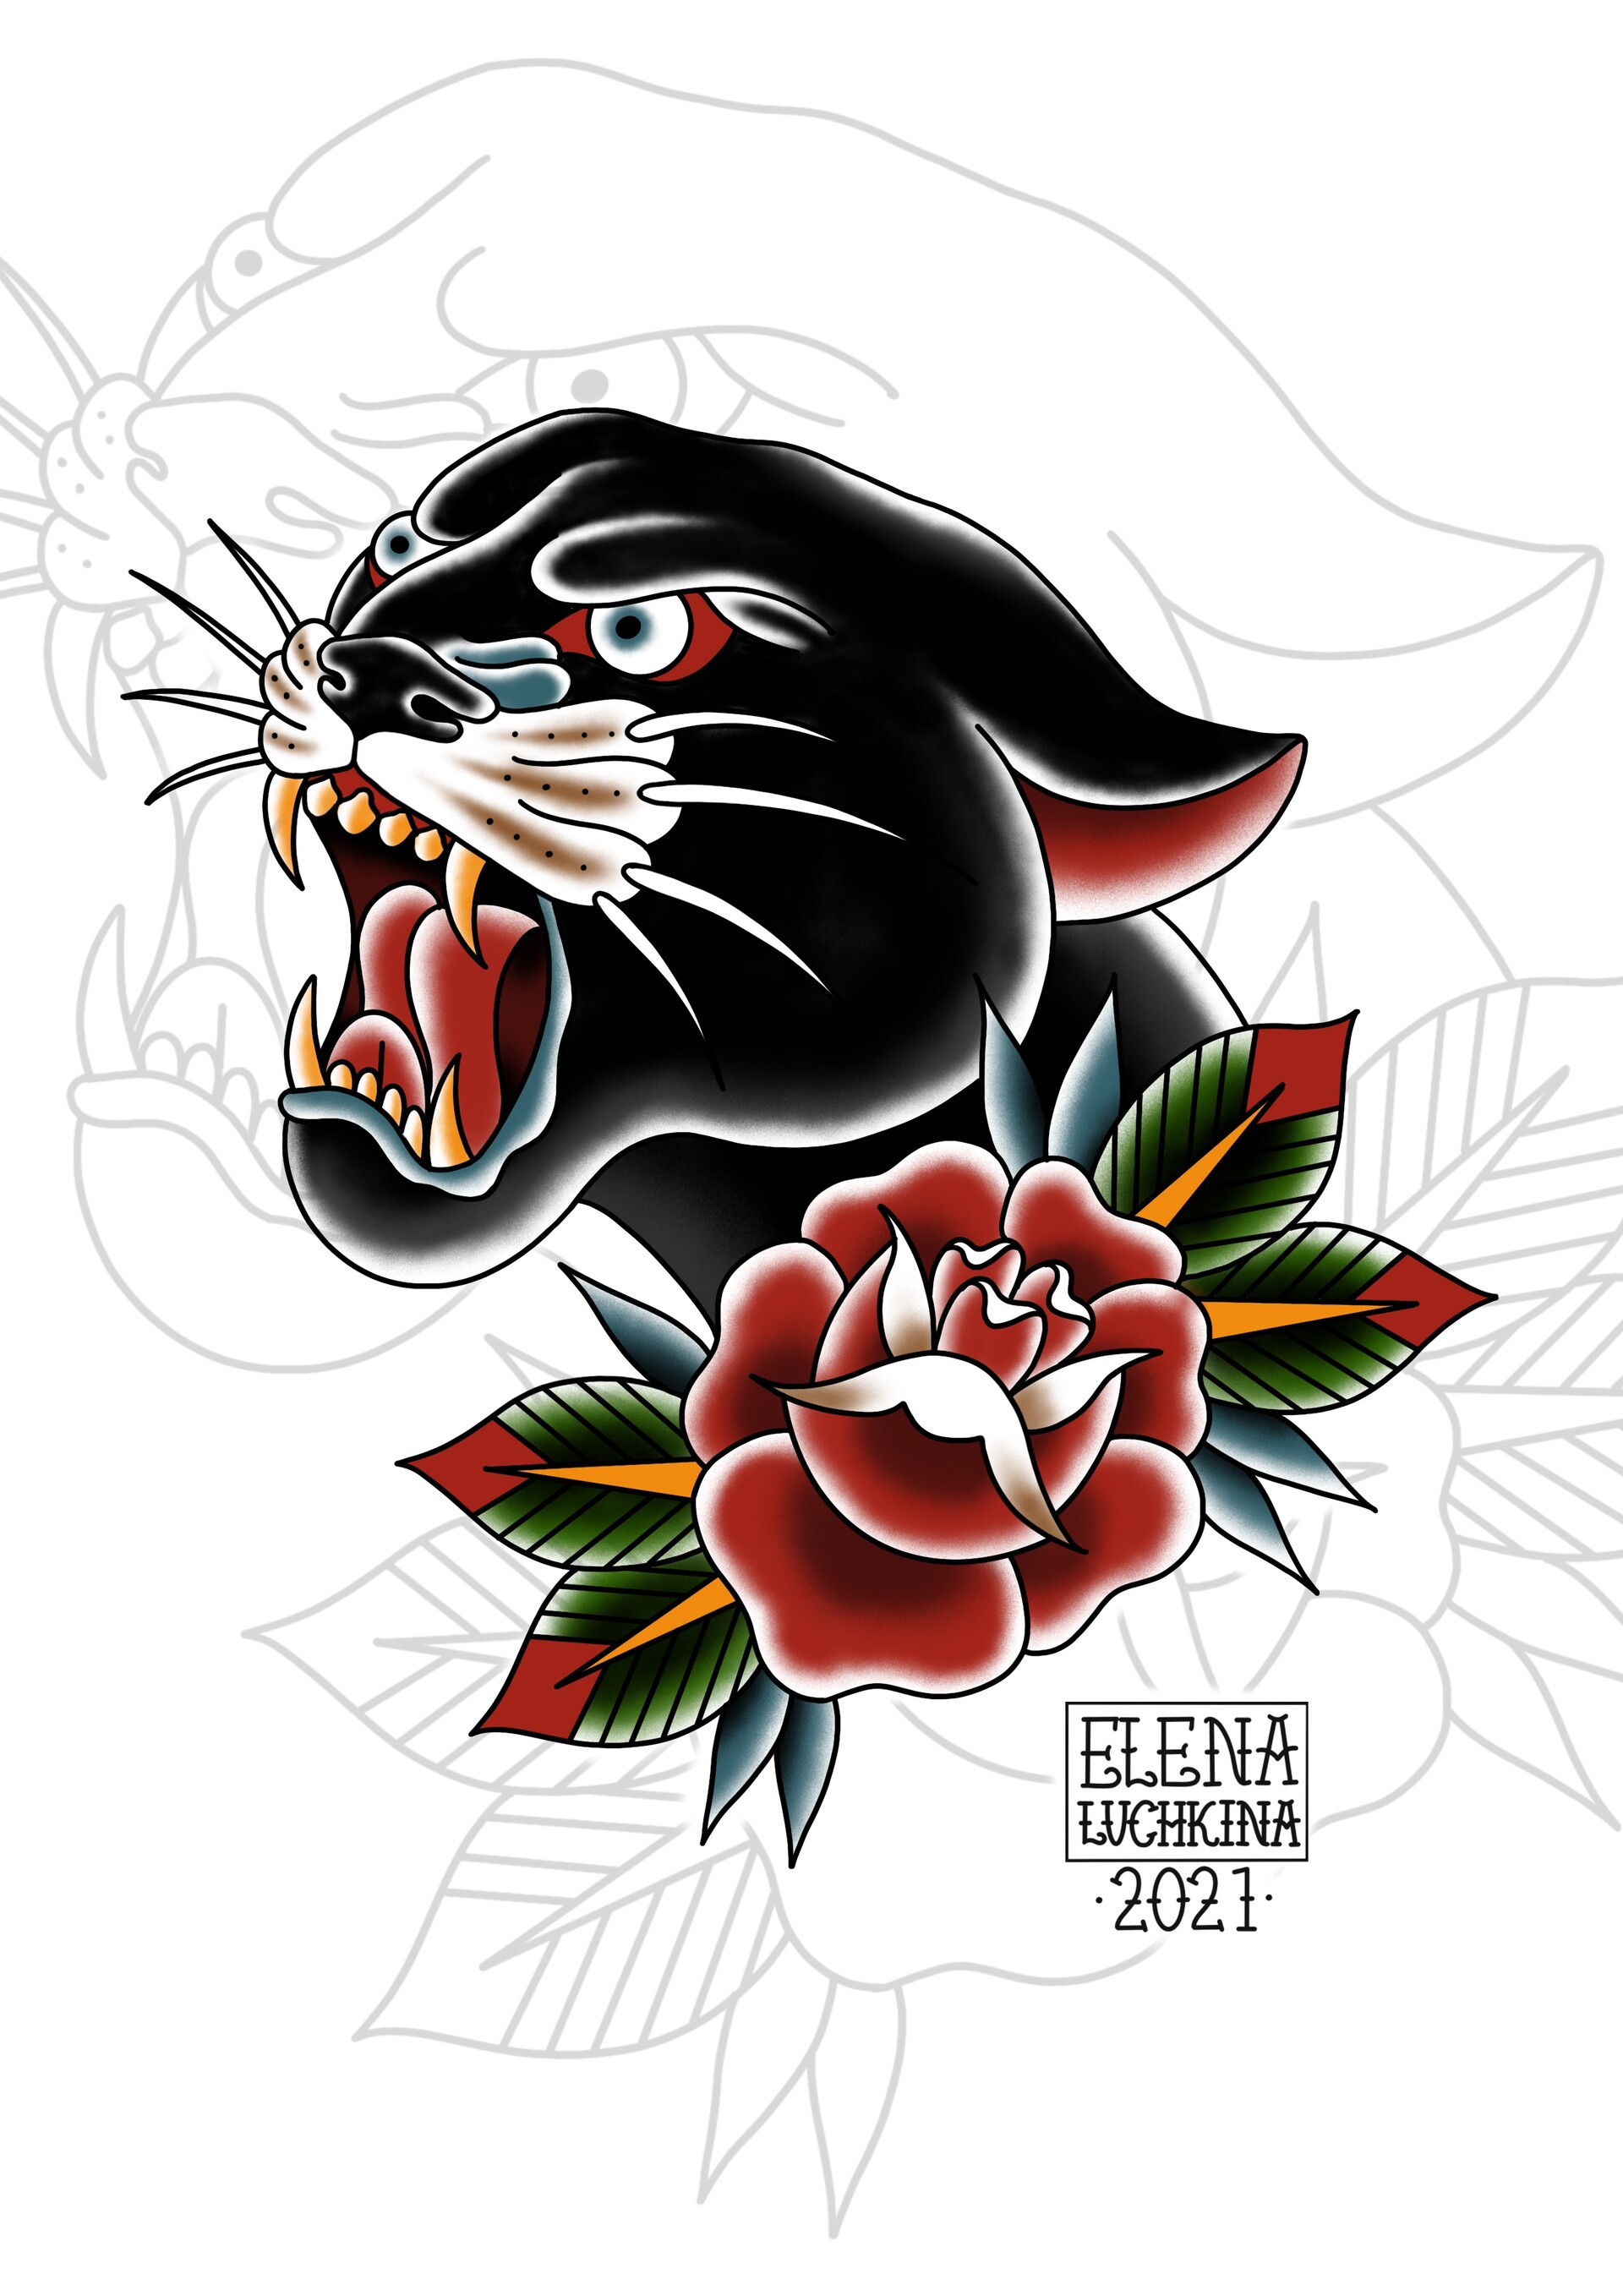 ArtStation - Old School panther and rose tattoo design